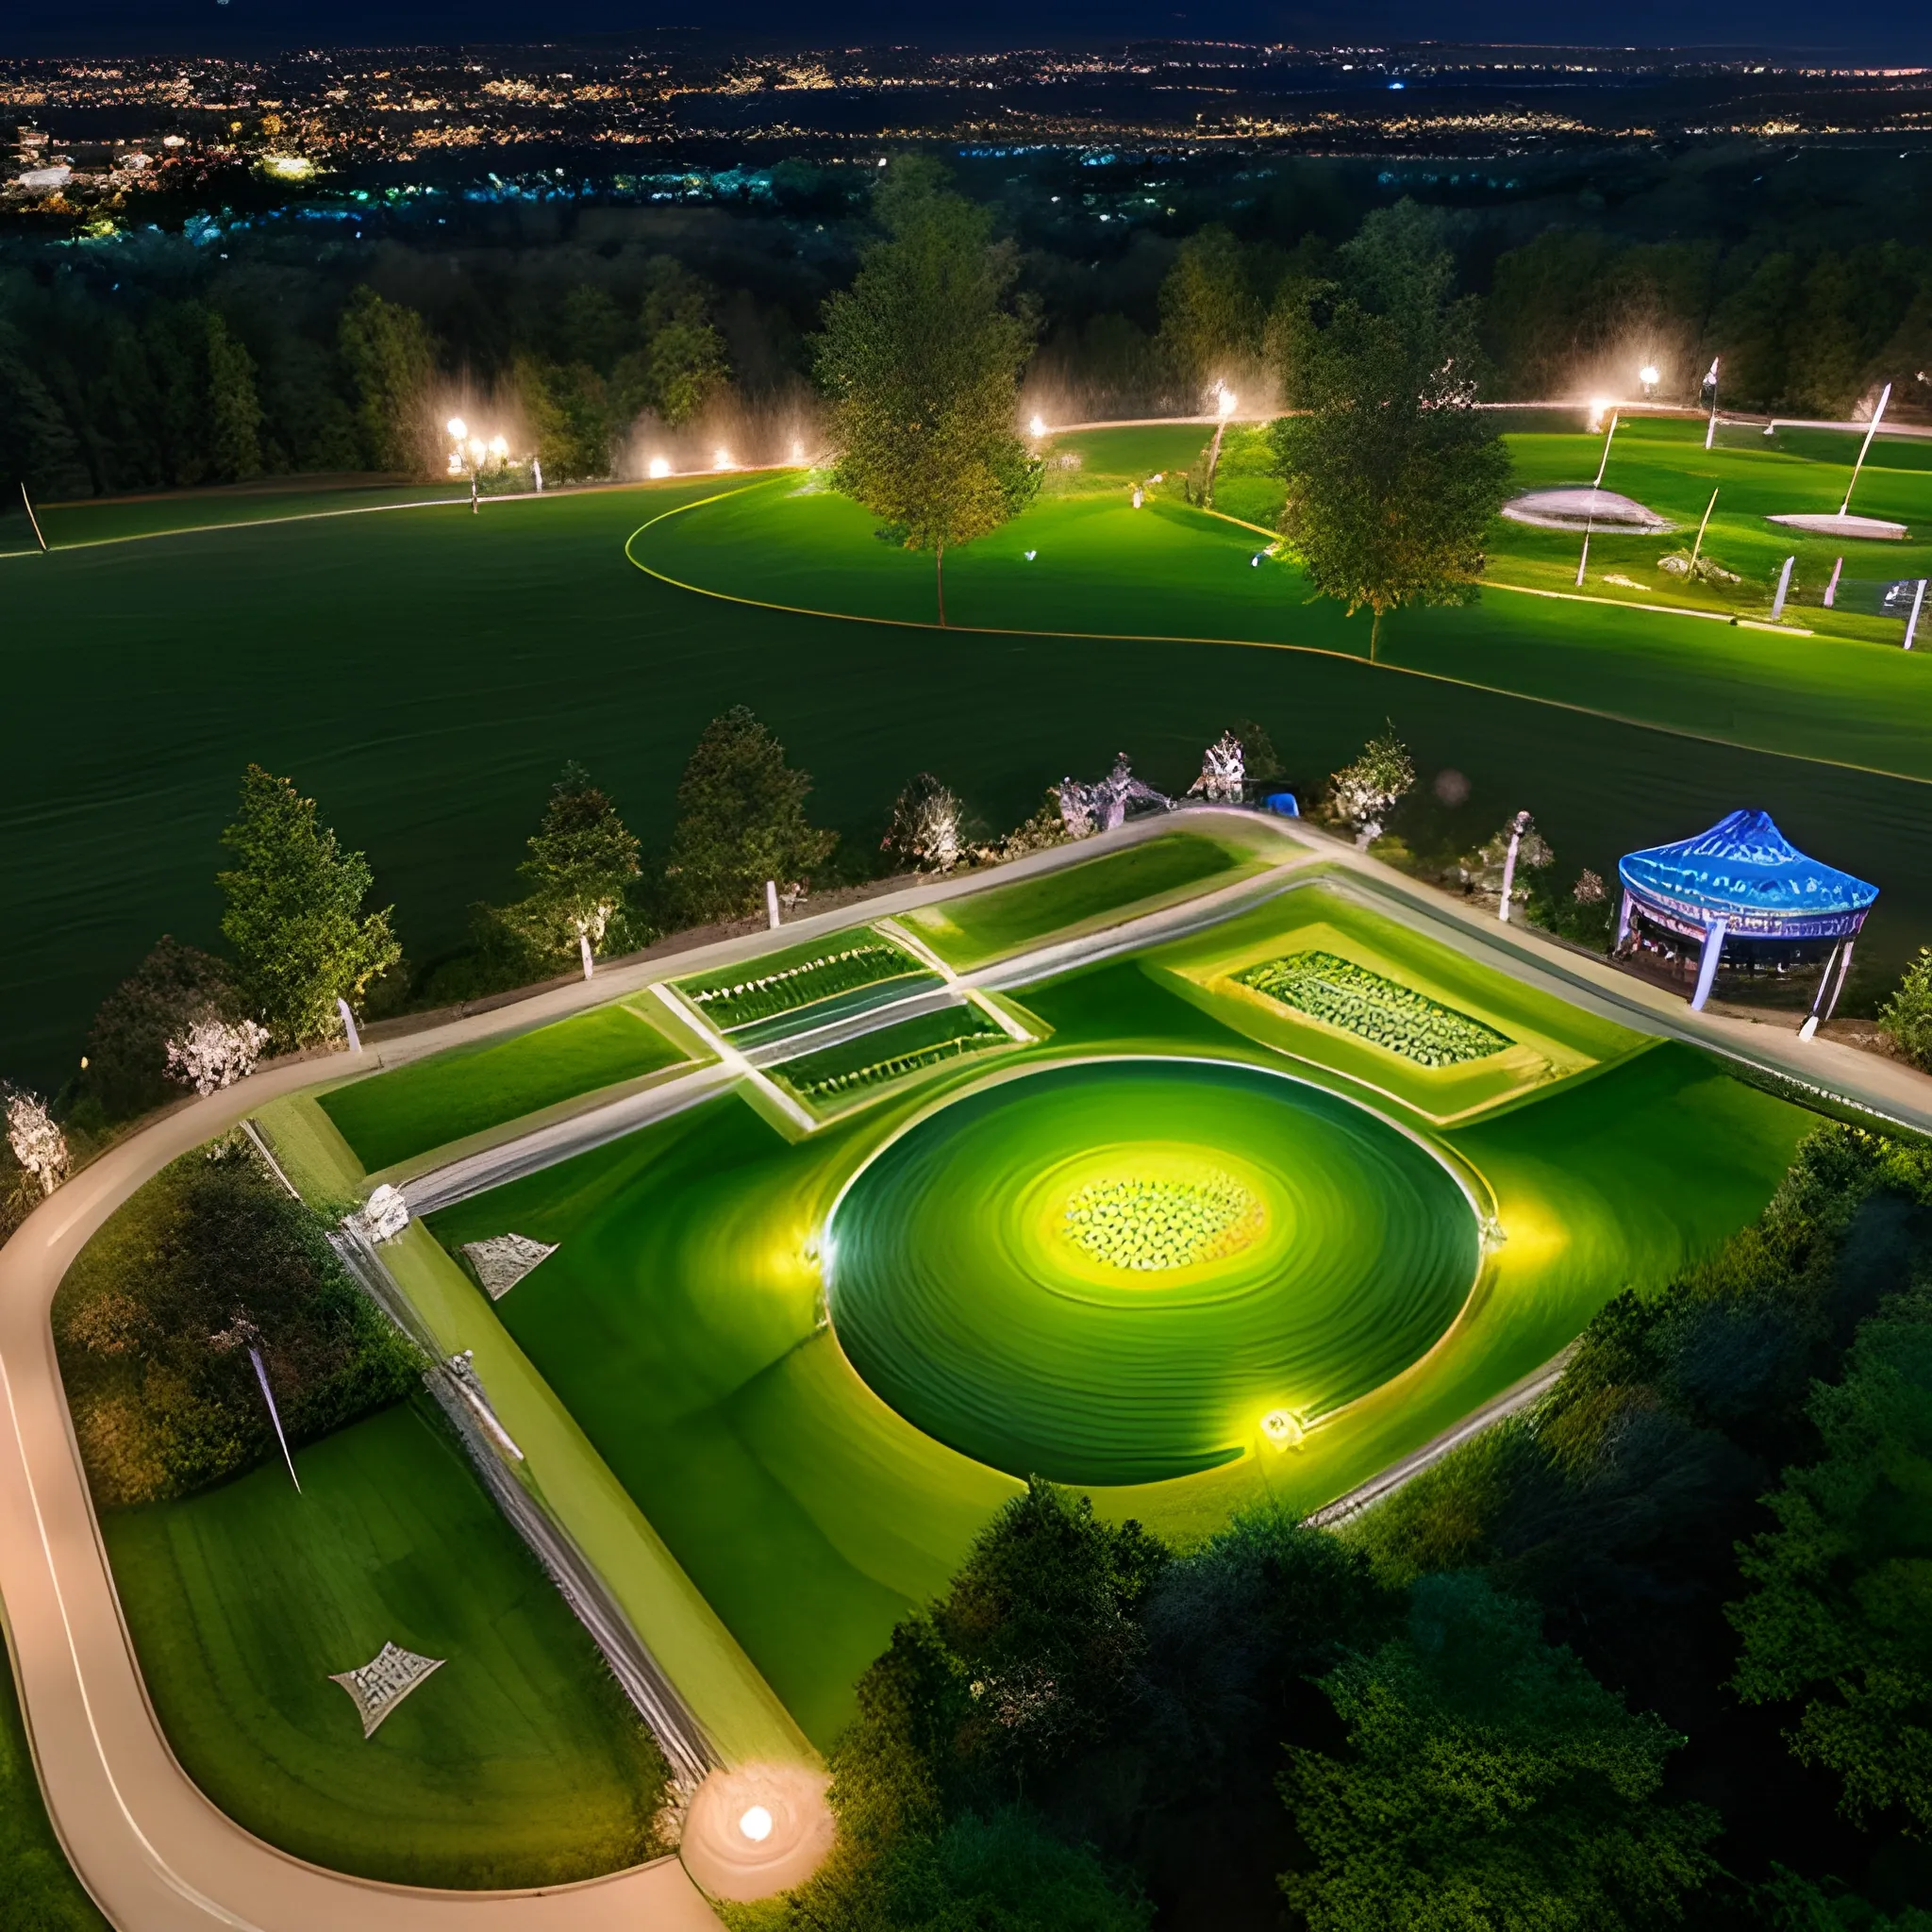 A magical grassy ground at night, realistyc, seen from above